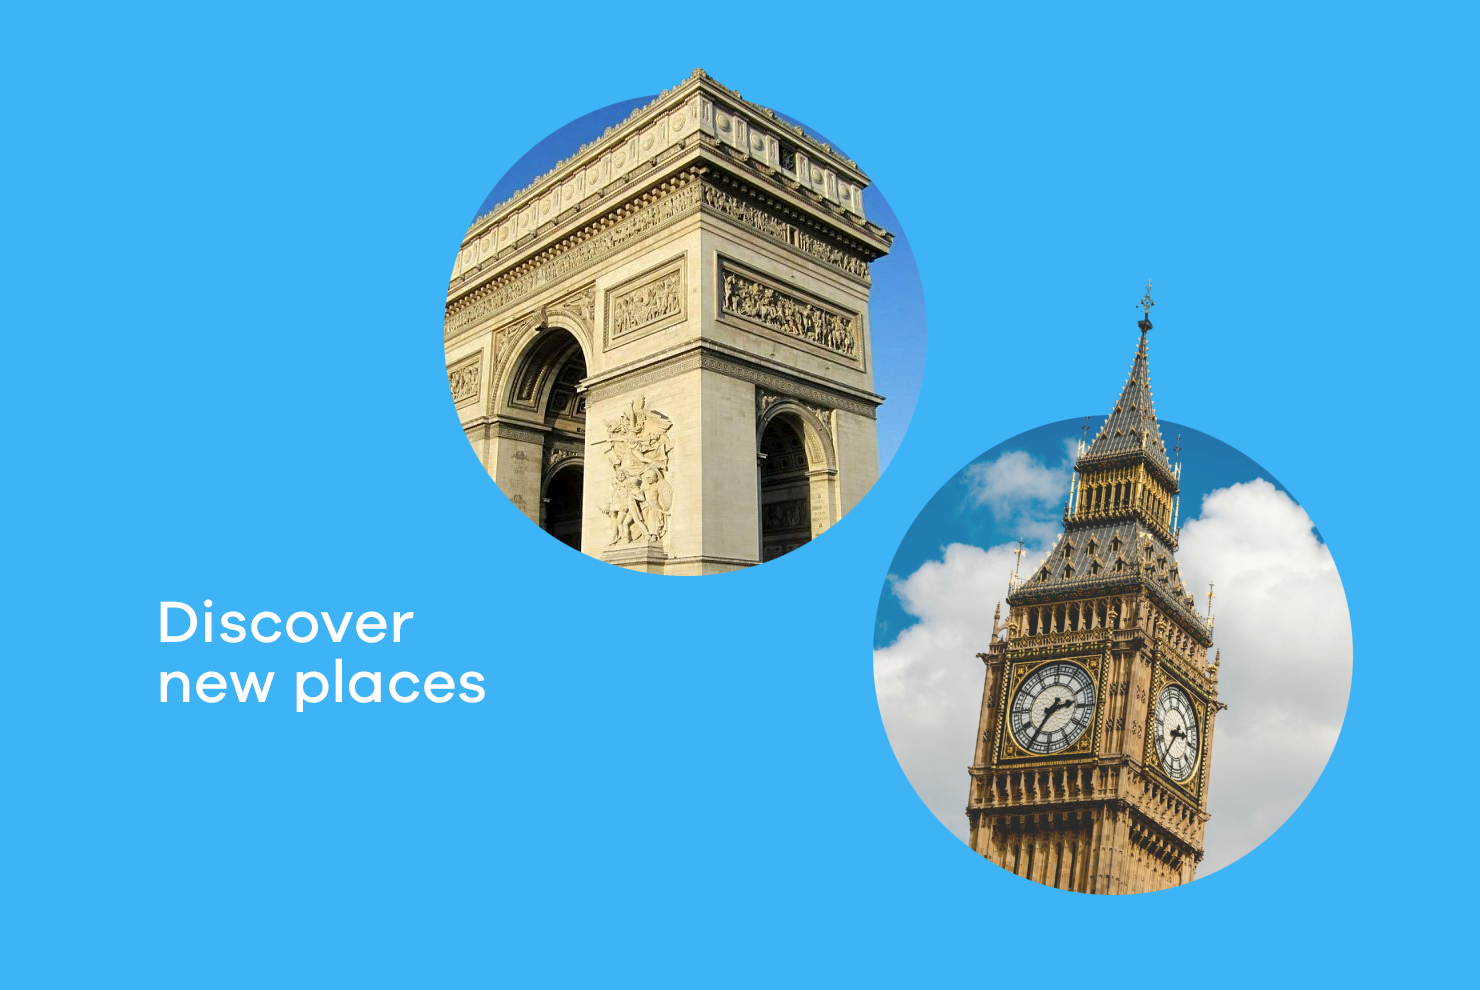 Discover new places with Questo